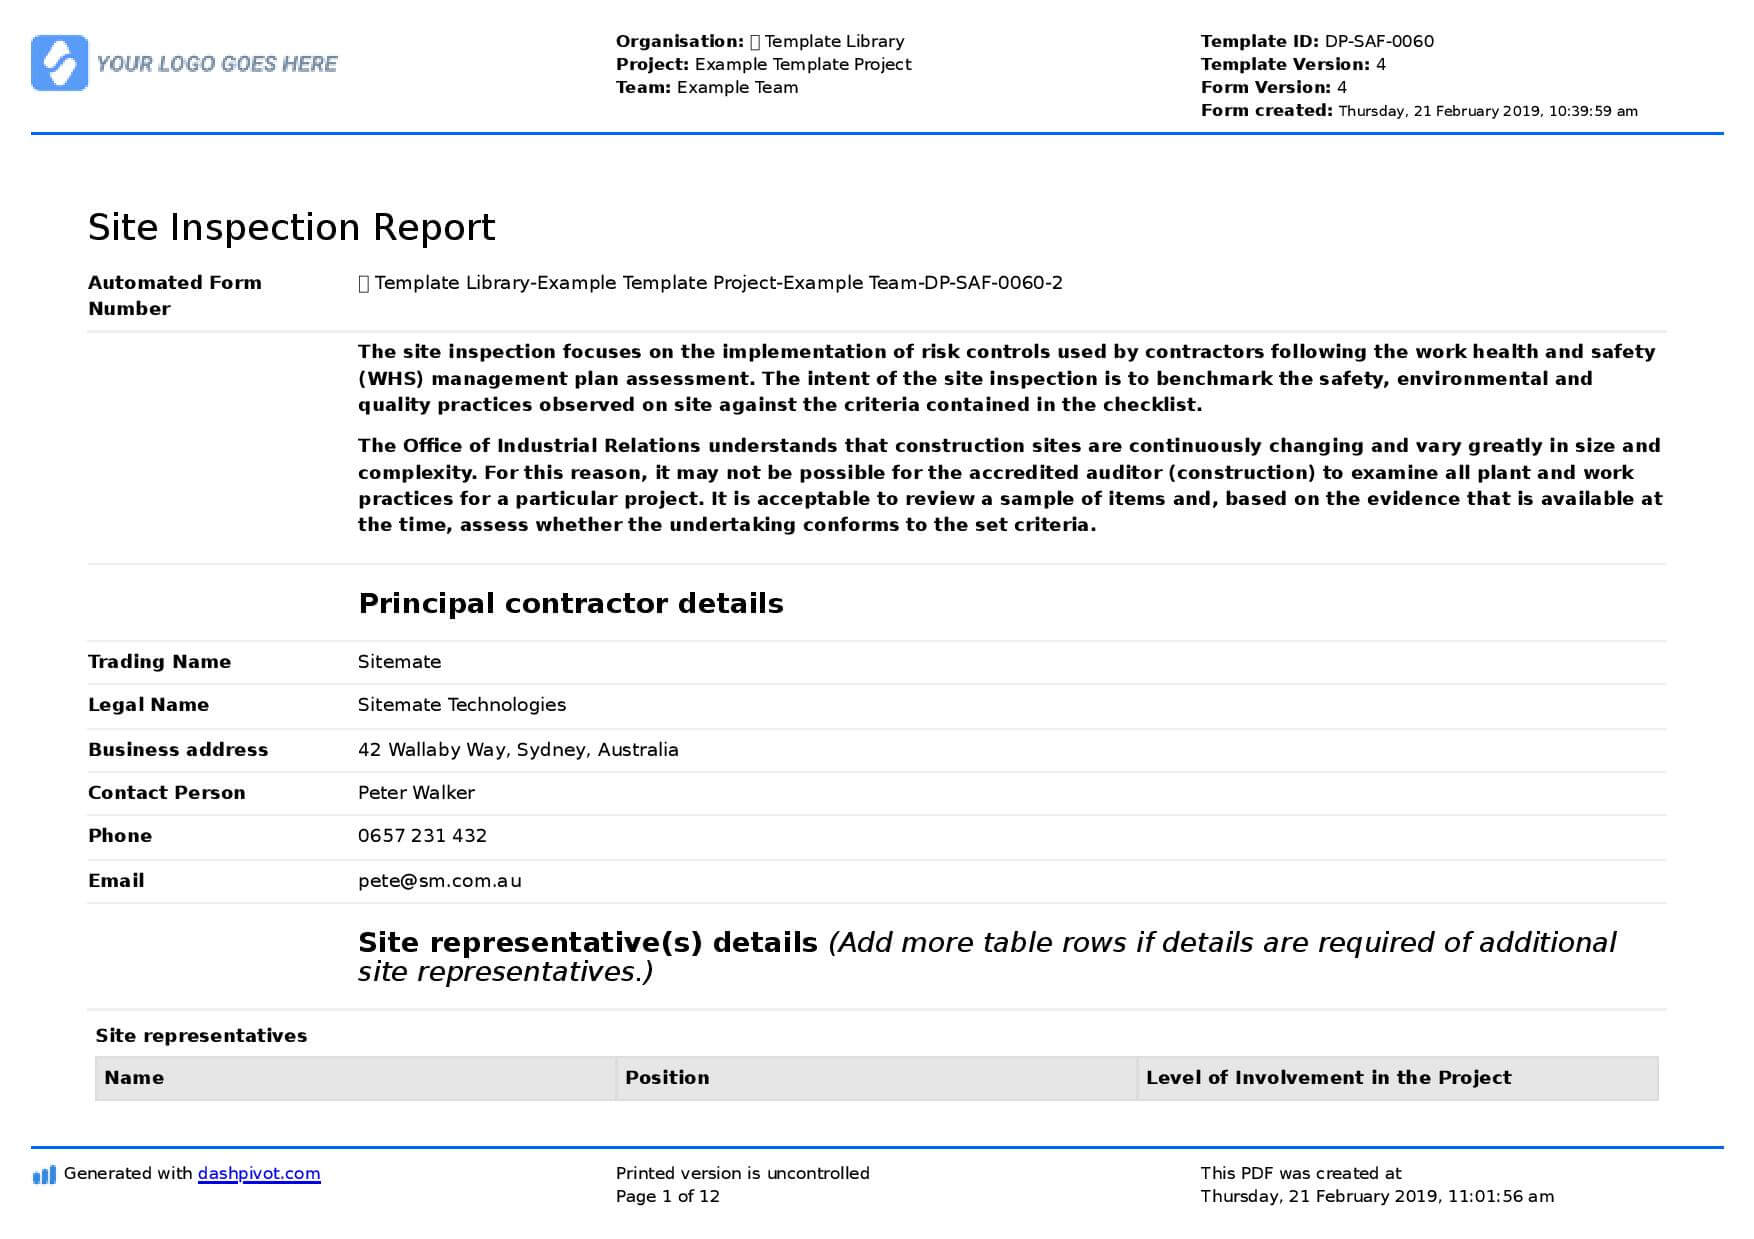 Site Inspection Report: Free Template, Sample And A Proven Intended For Part Inspection Report Template